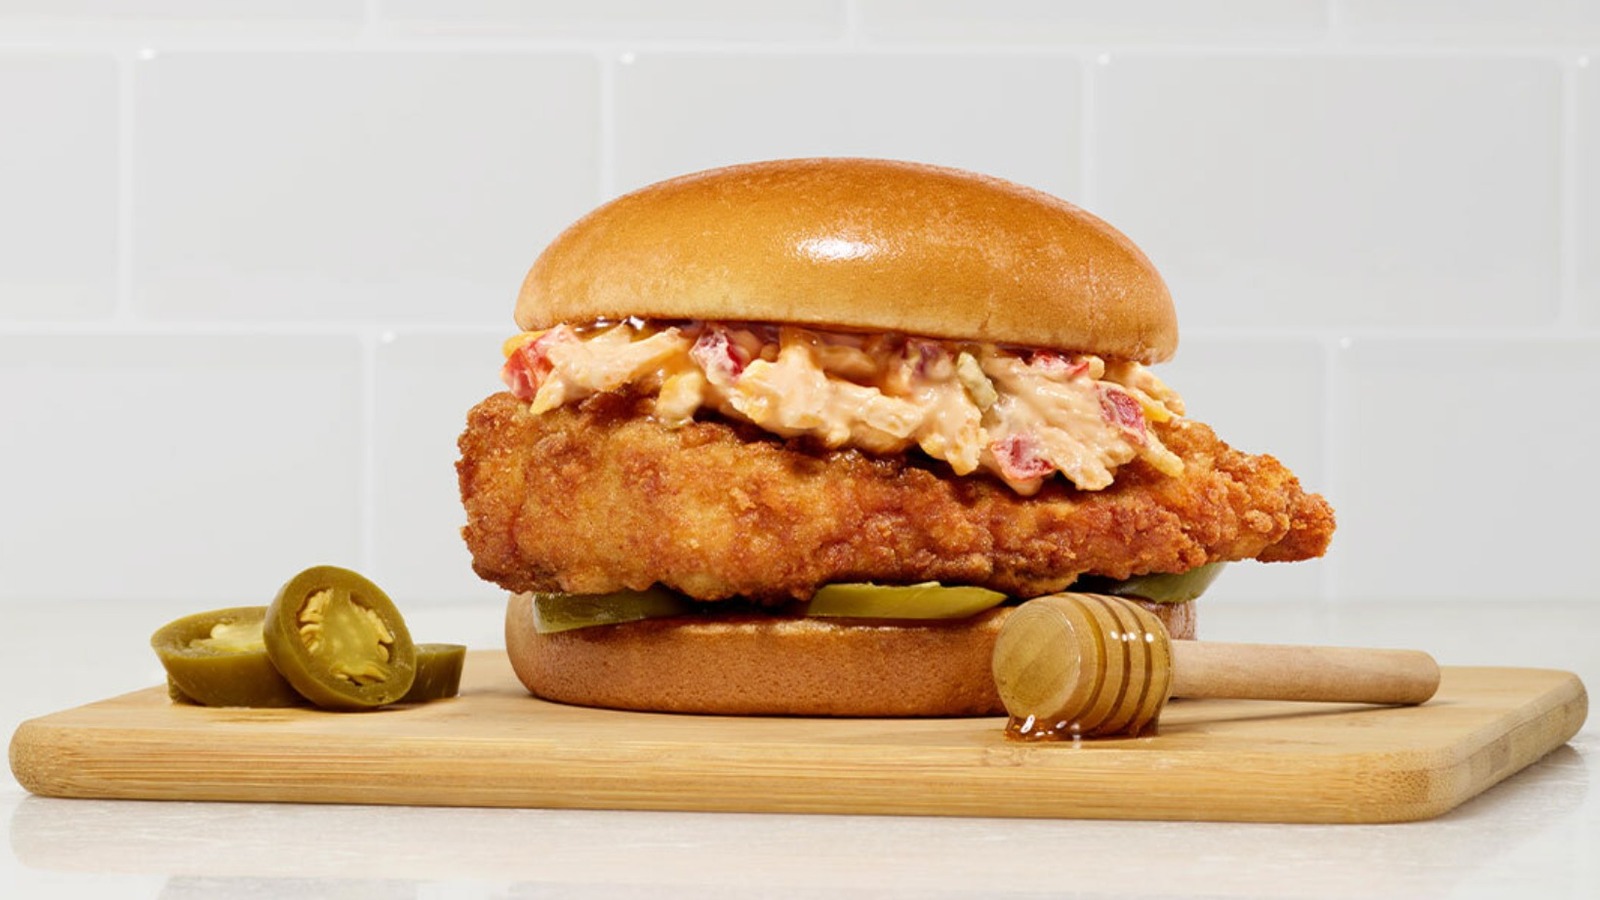 https://www.tastingtable.com/img/gallery/chick-fil-a-debuts-its-first-new-chicken-sandwich-in-almost-a-decade/l-intro-1692129439.jpg